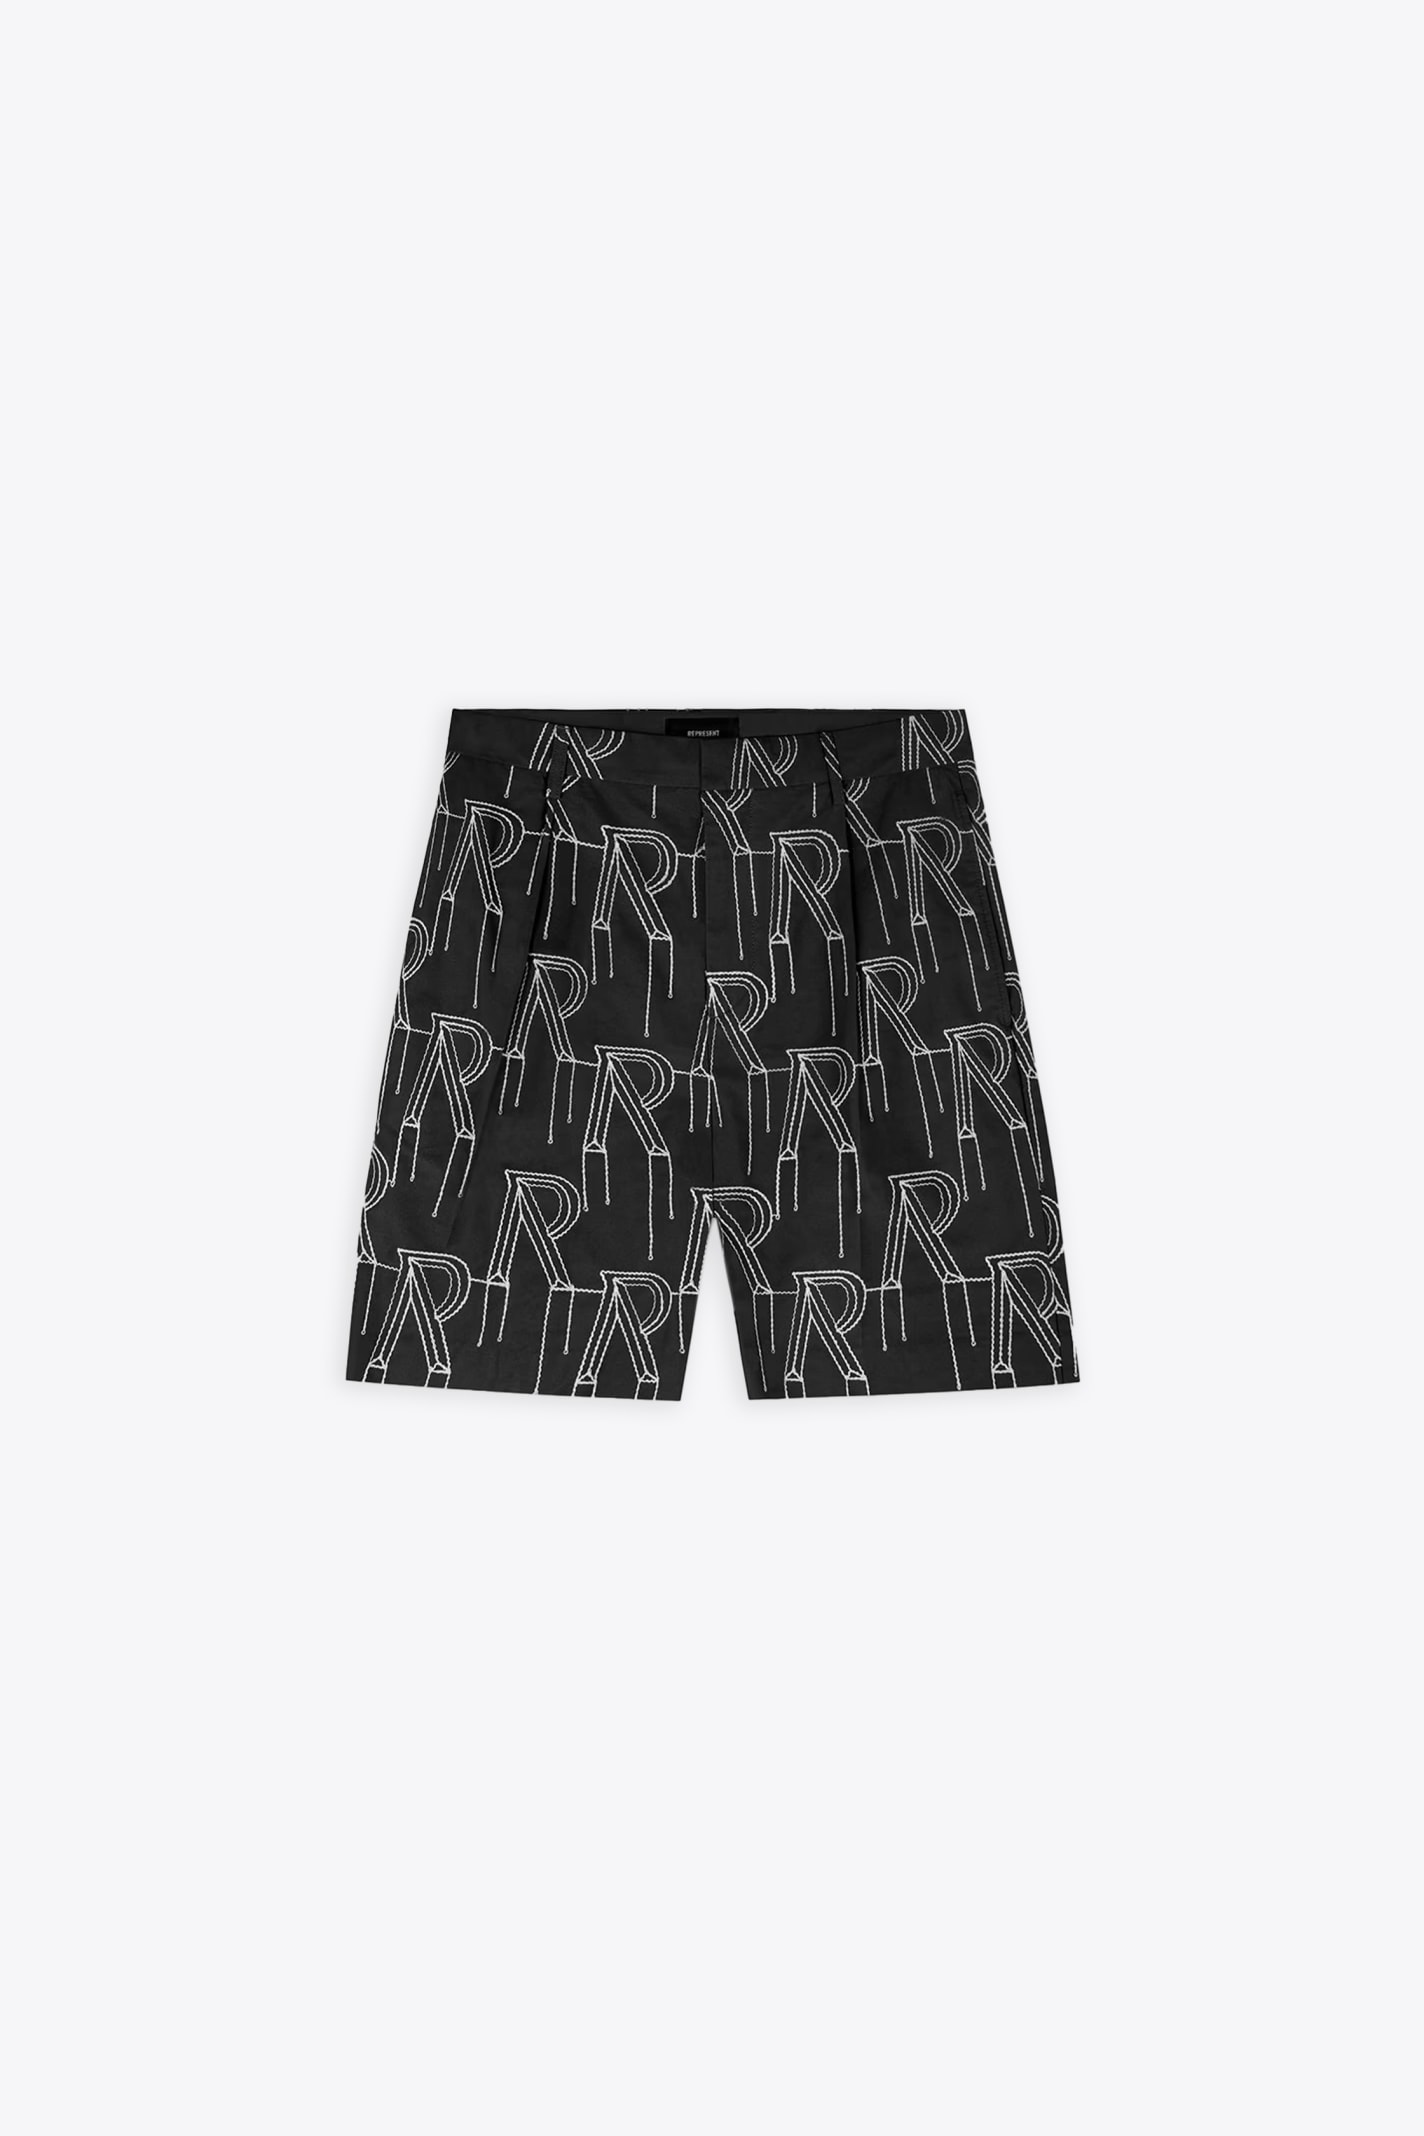 Embrodiered Initial Tailored Short Black Cotton Pleated Short With Monogram Embroidery - Embroidered Initial Tailored Short